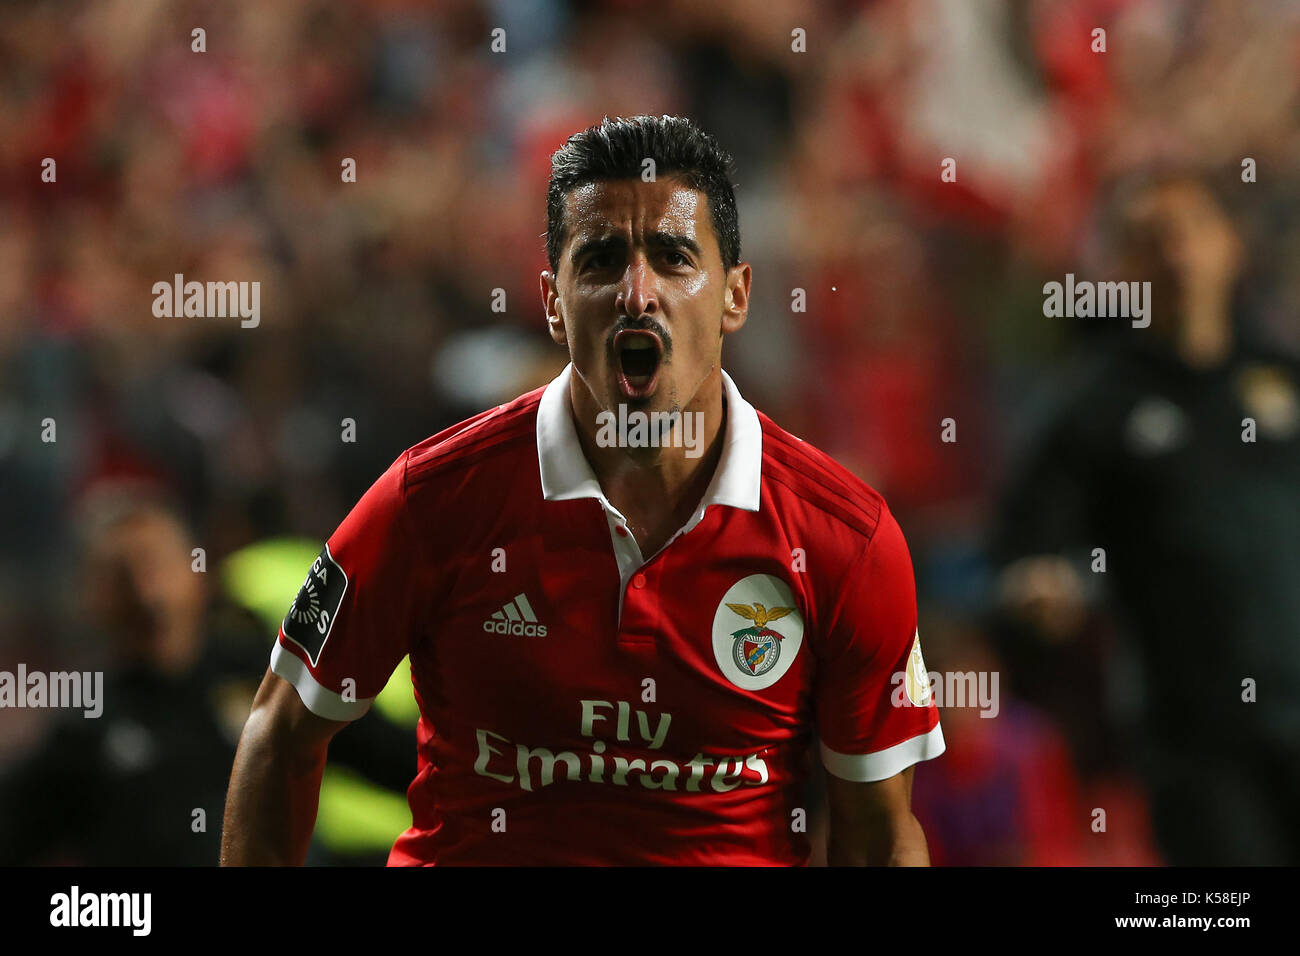 Benfica«s defender Andre Almeida from Portugal celebrating after scoring a goal during the Premier League 2017/18 match between SL Benfica v Portimonense SC, at Luz Stadium in Lisbon on September 8, 2017. (Photo by Bruno Barros / DPI) Stock Photo